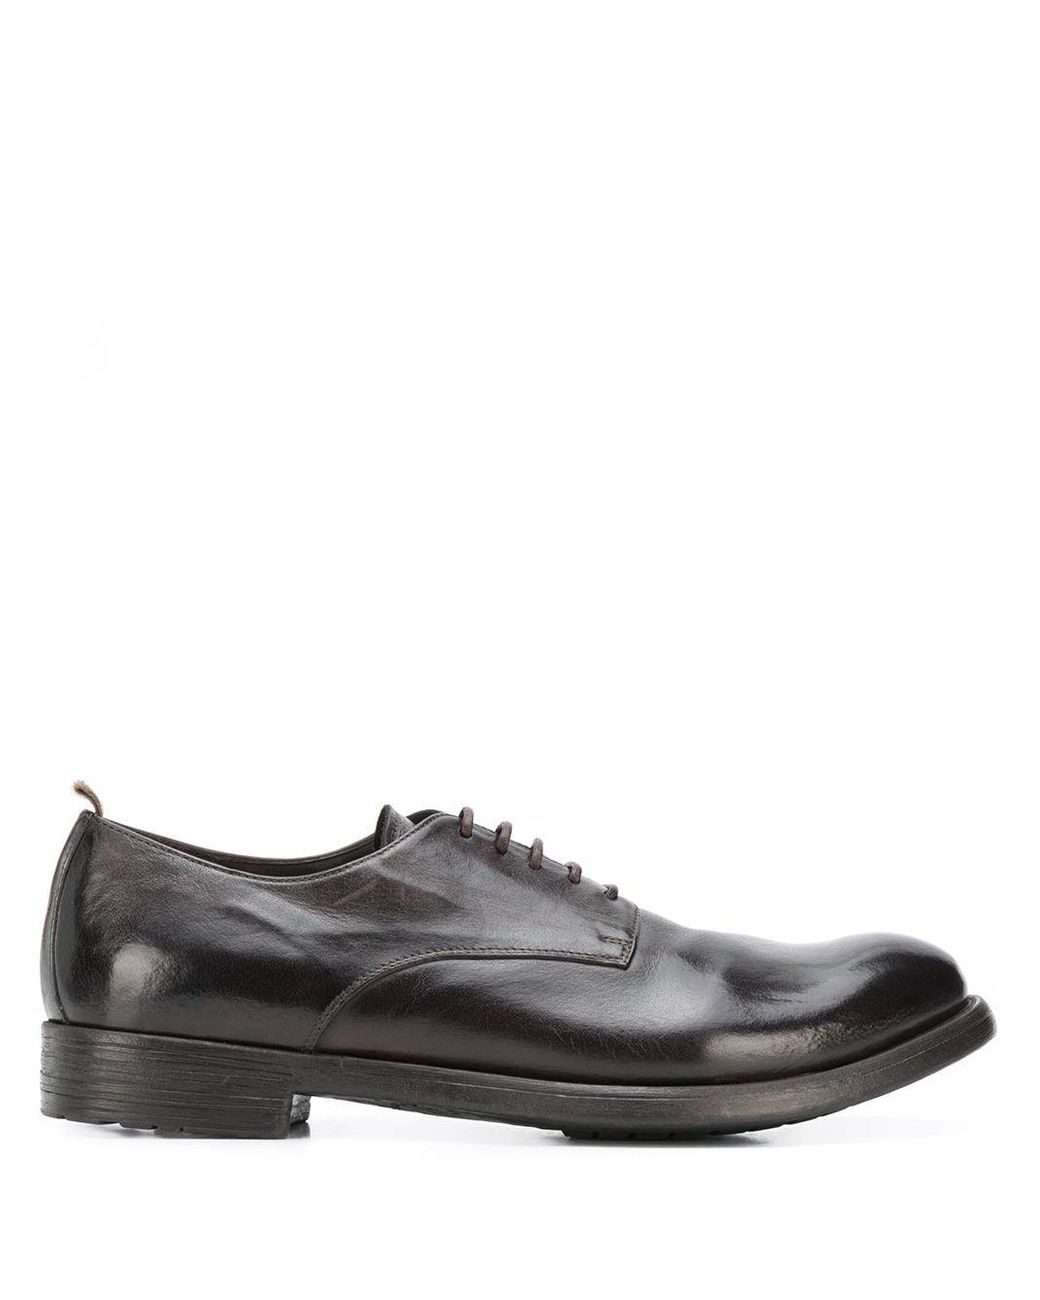 Officine Creative Leather Lace-up Derby Shoes in Brown for Men - Lyst